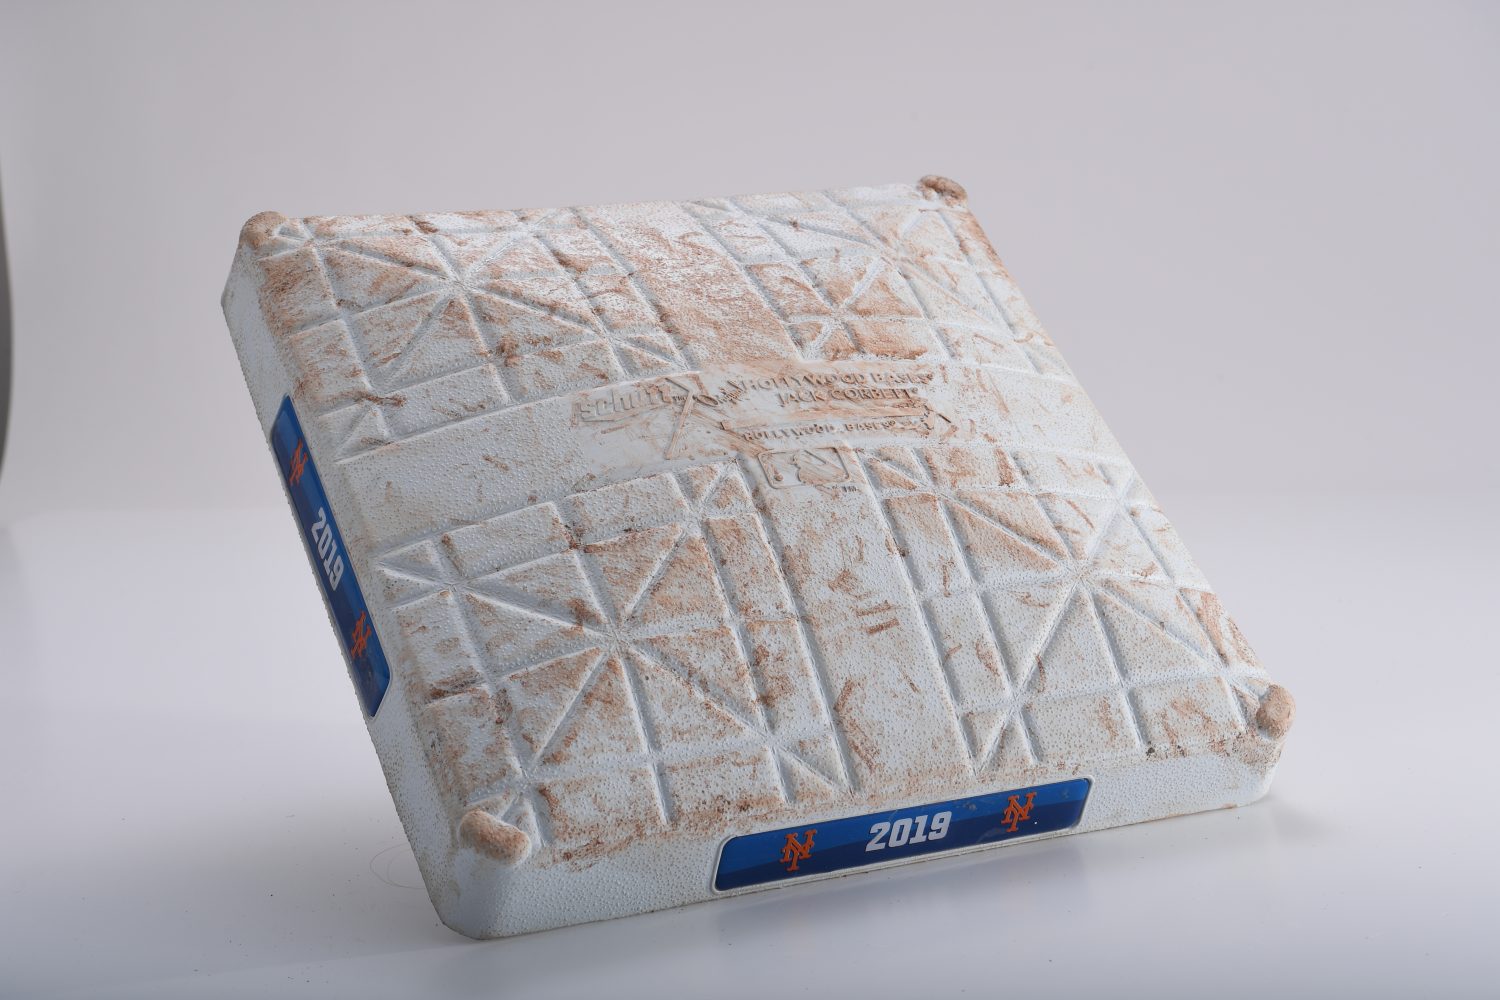 Third Base When Pete Alonso Tied Aaron Judge Rookie Home Run Record